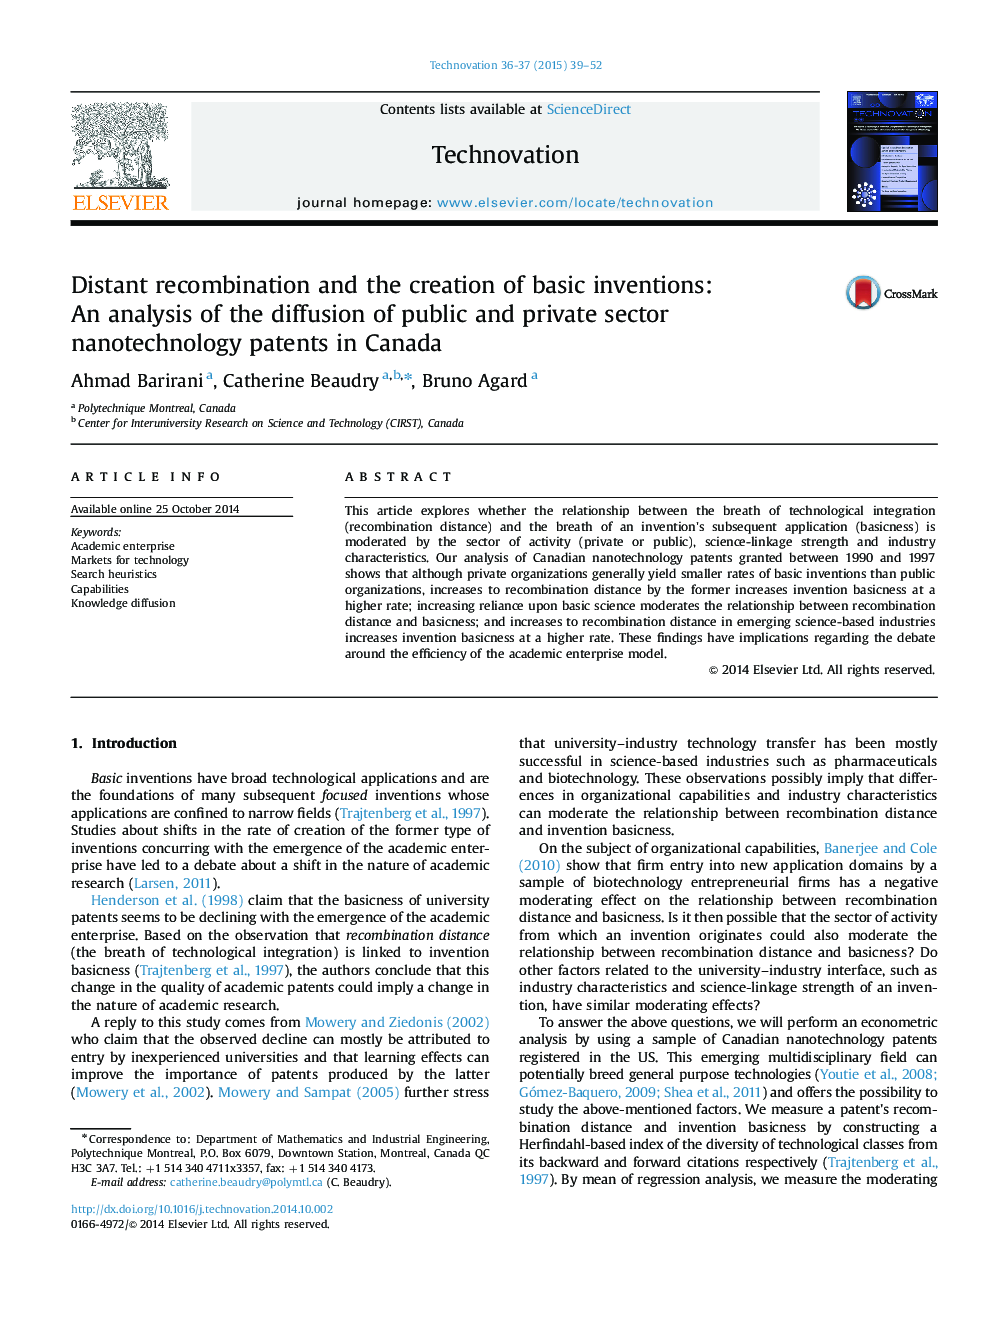 Distant recombination and the creation of basic inventions: An analysis of the diffusion of public and private sector nanotechnology patents in Canada